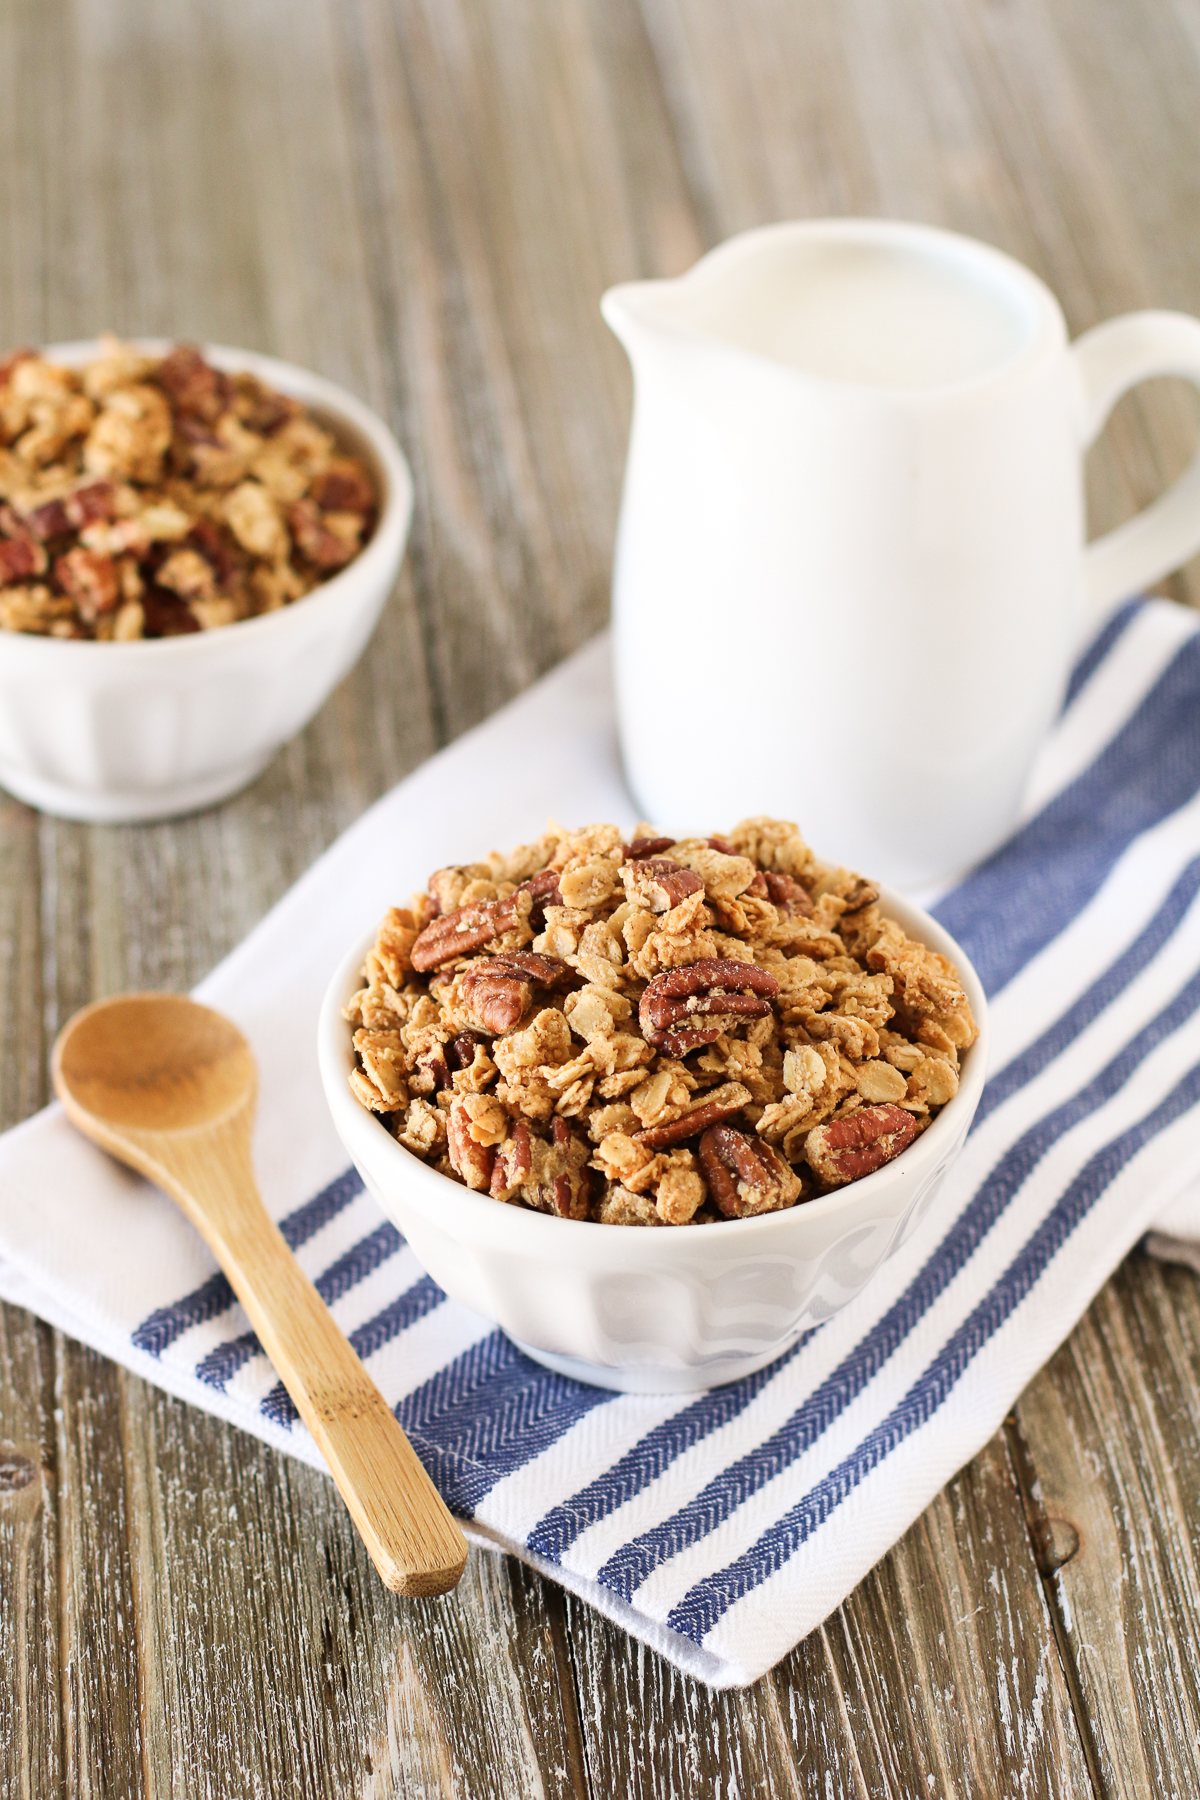 Gluten Free Vegan Pumpkin Spice Granola. For all of the pumpkin spice lovers out there, this homemade granola is for you! 